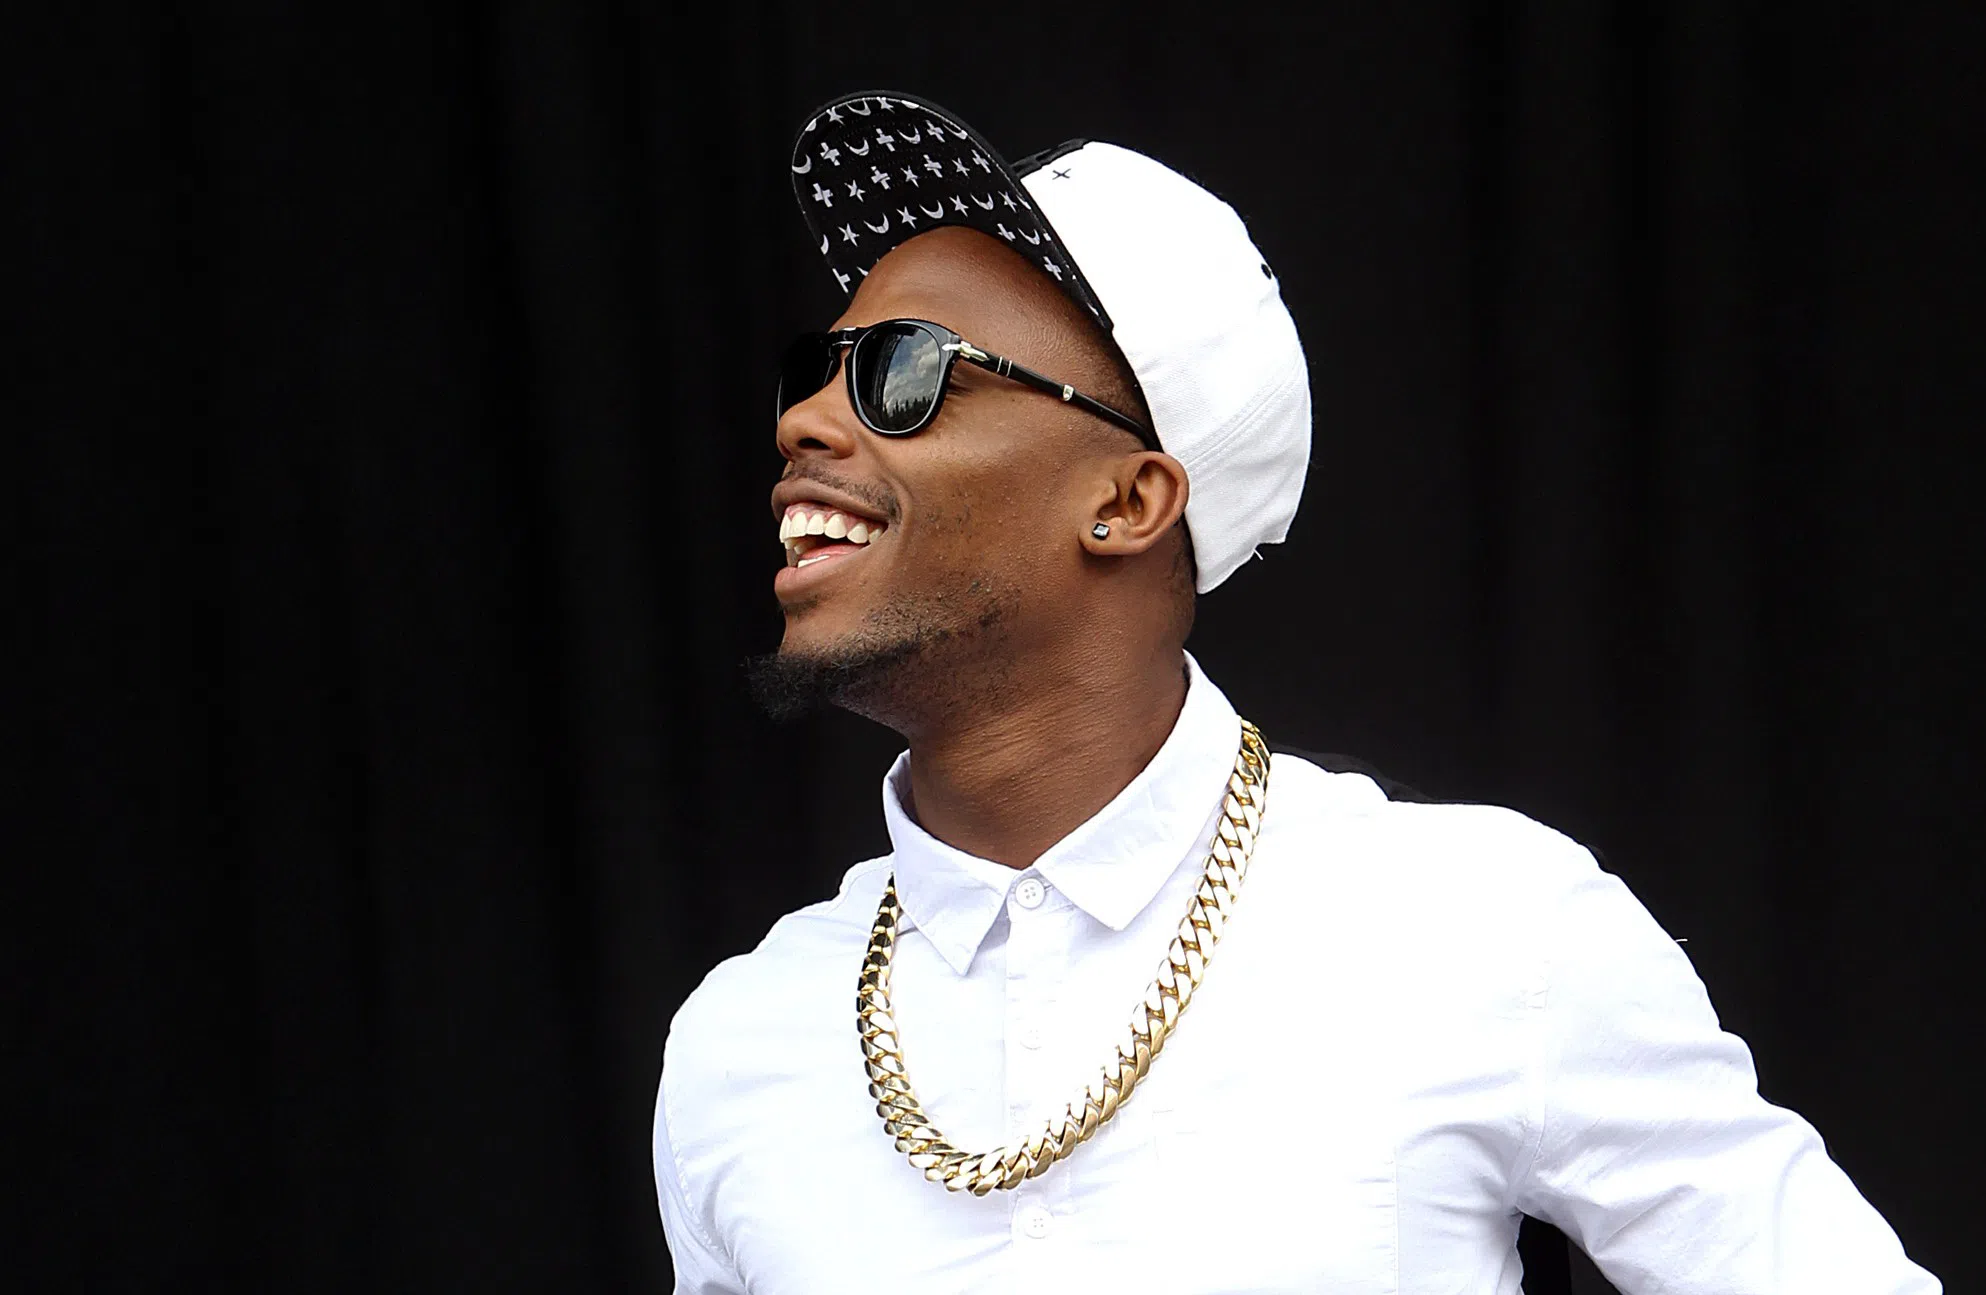 B.o.B Blames Ex-Manager After Being Sued For $3 Million In Unpaid Royalties